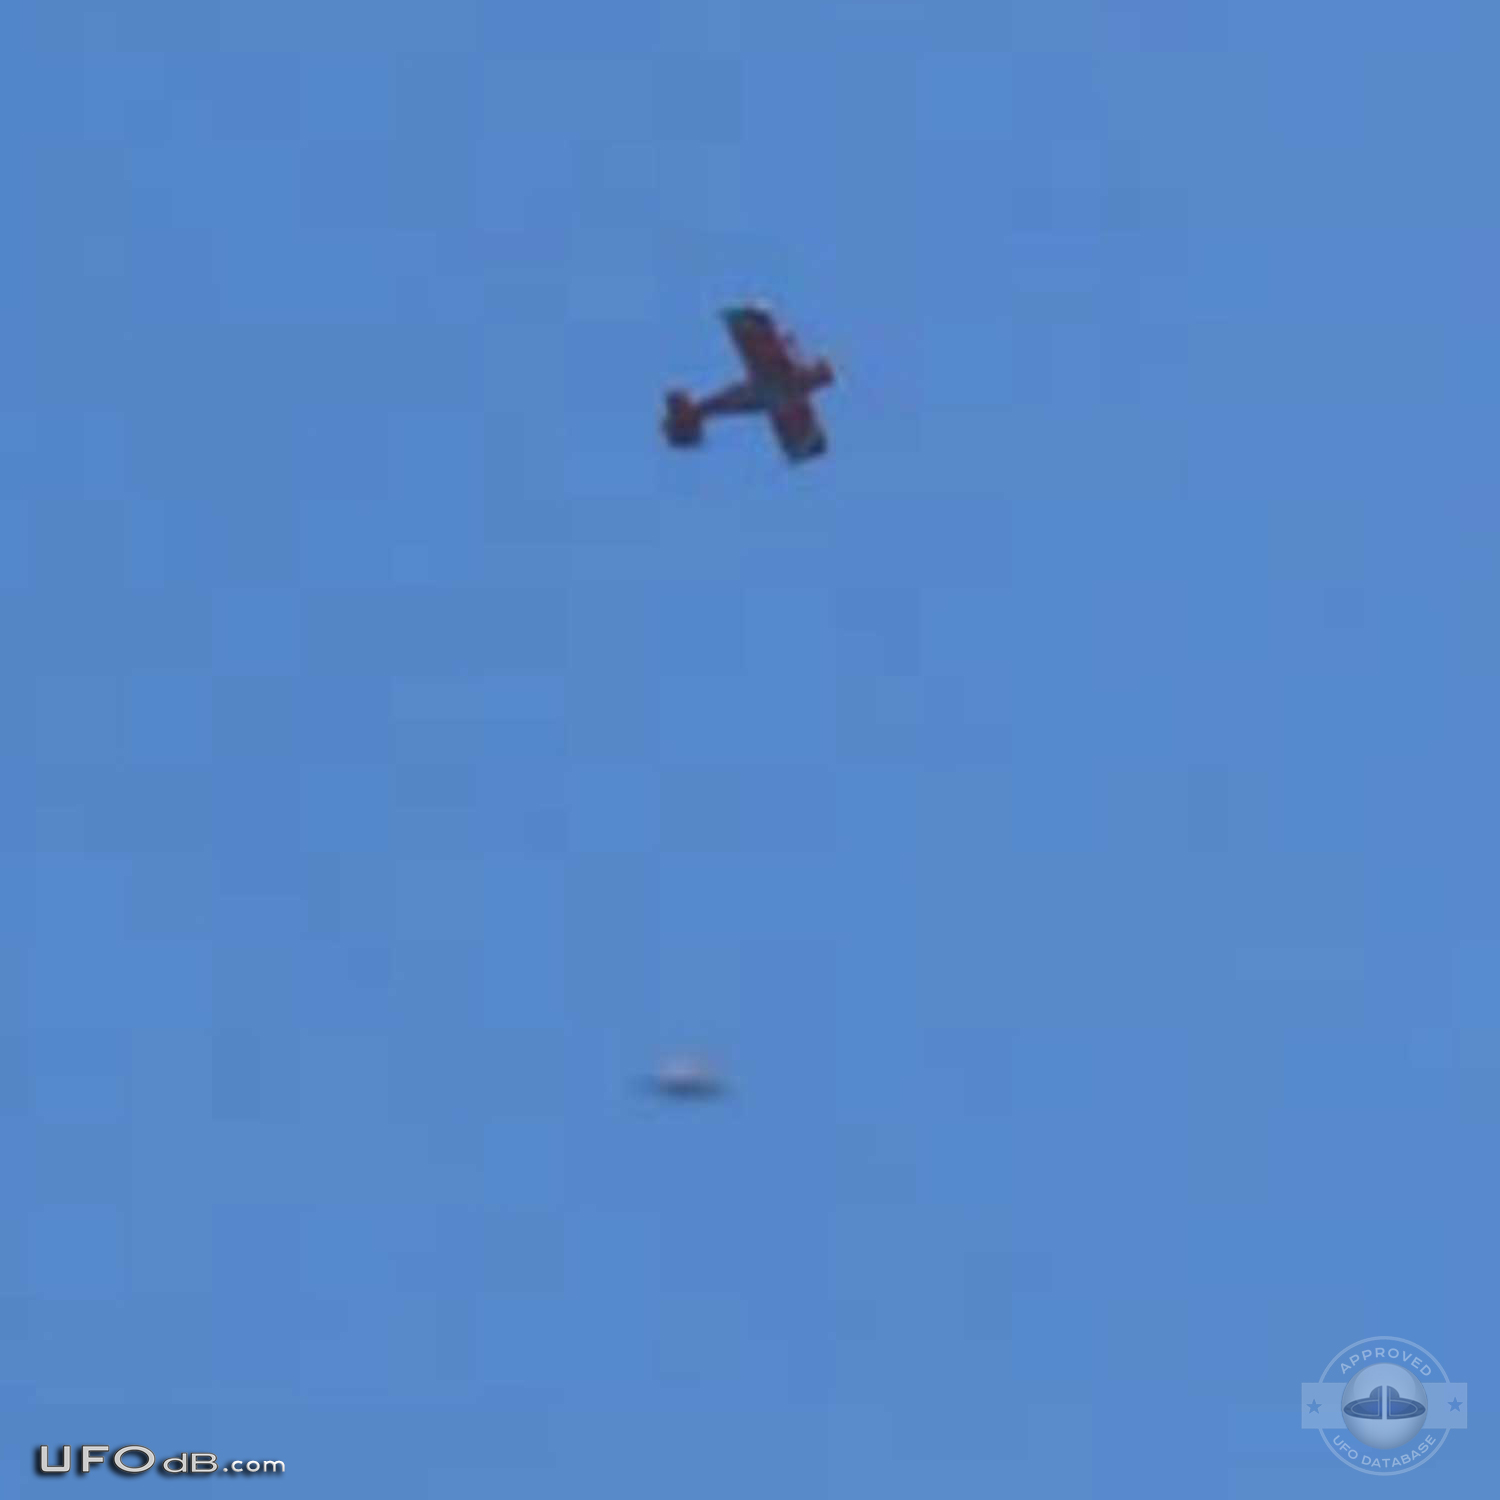 In Cape Town, South Africa a man get picture of UFO near Airplane 2011 UFO Picture #386-1